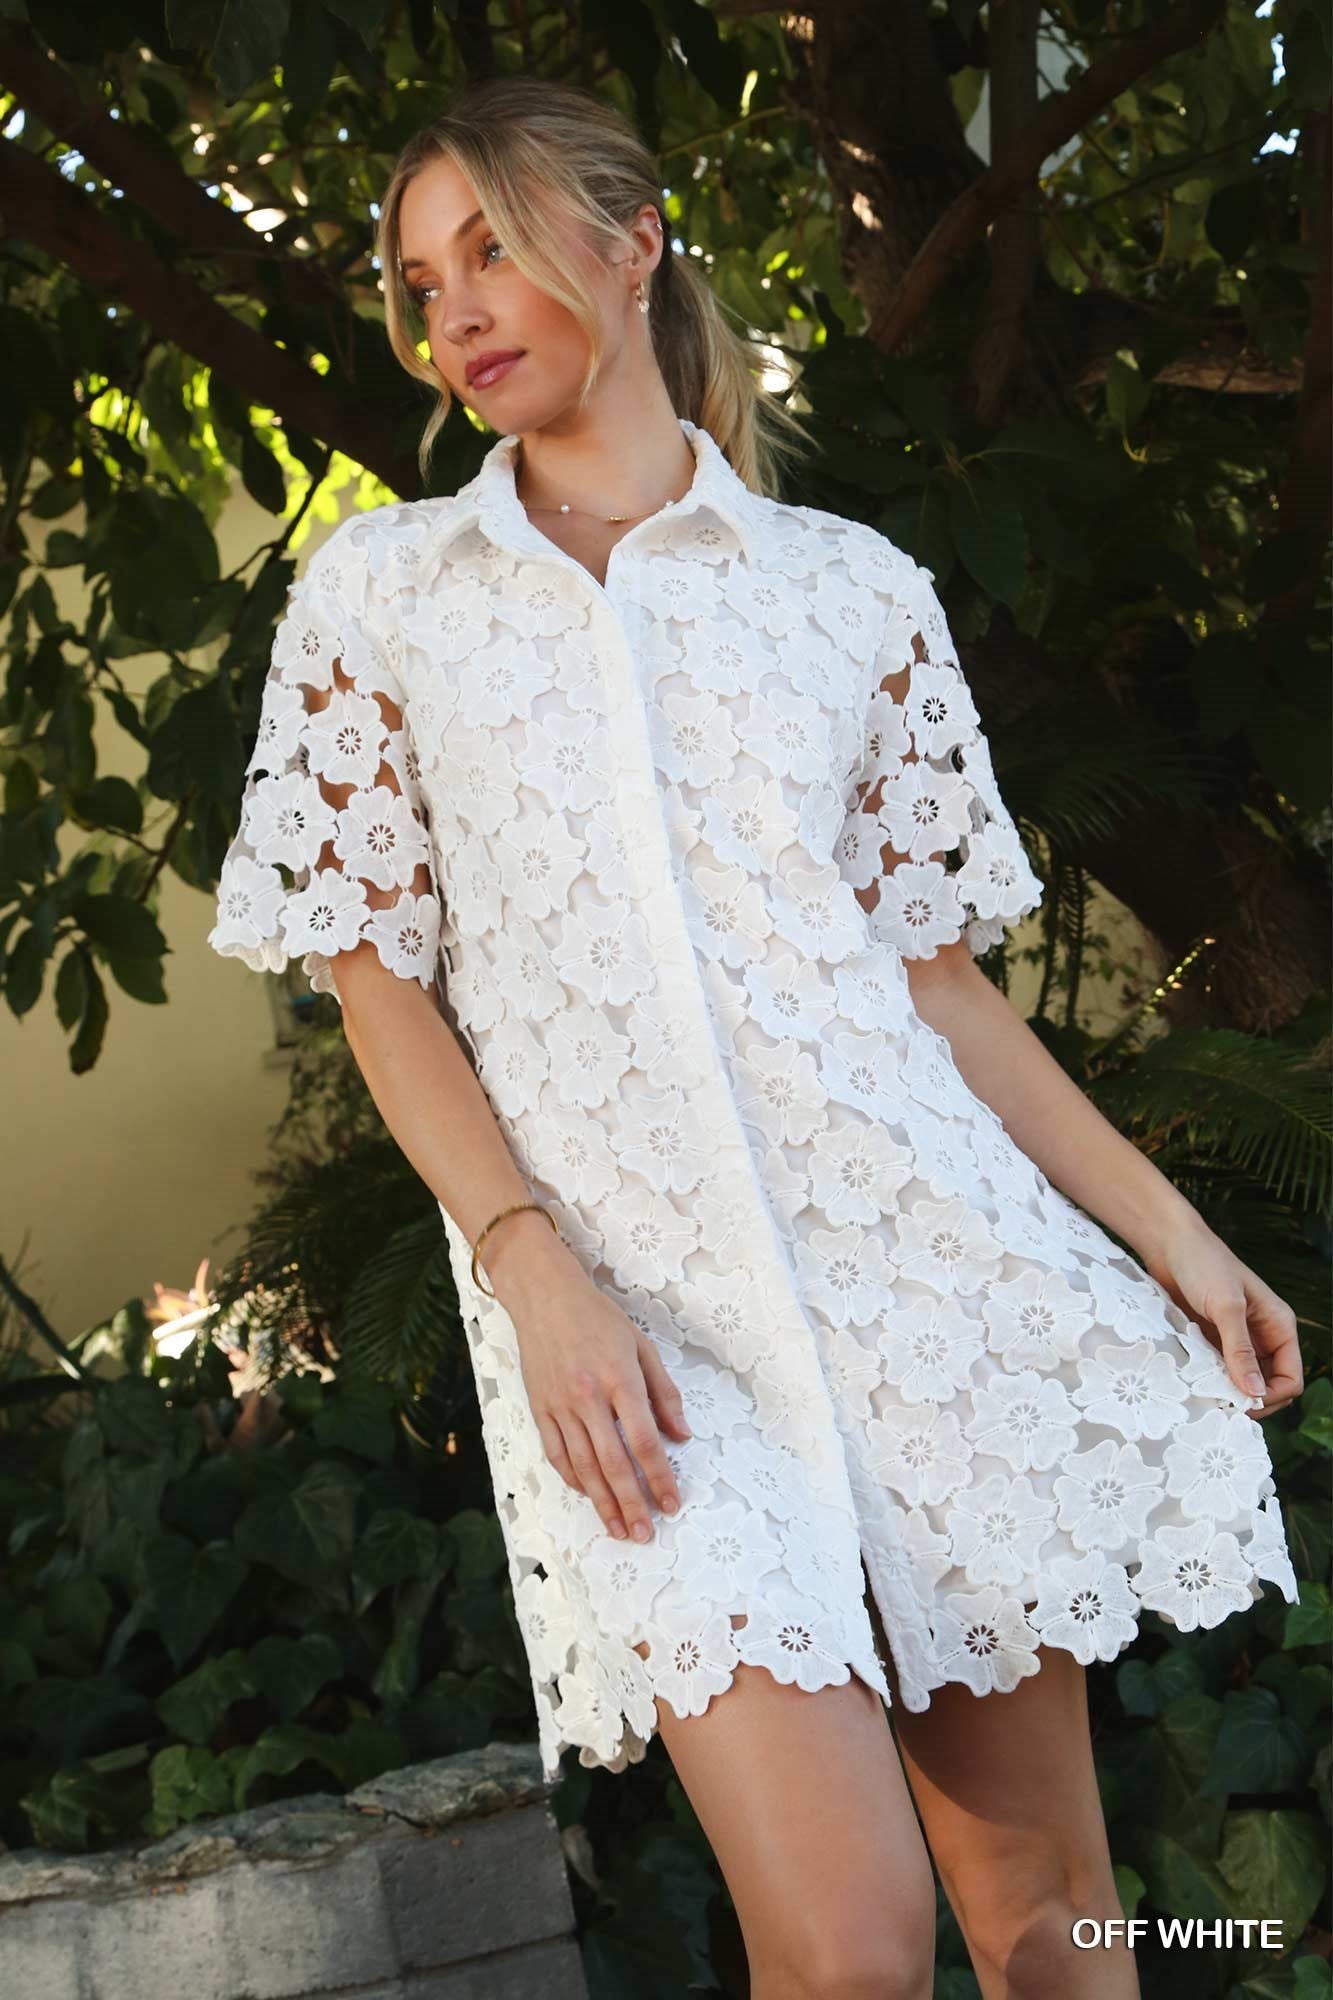 Get ready to bloom with the Flower Power Dress! This playful dress features a charming floral lace design and a button down front, perfect for a fun and flirty look. Embrace your inner flower child and stand out in this quirky and stylish dress.